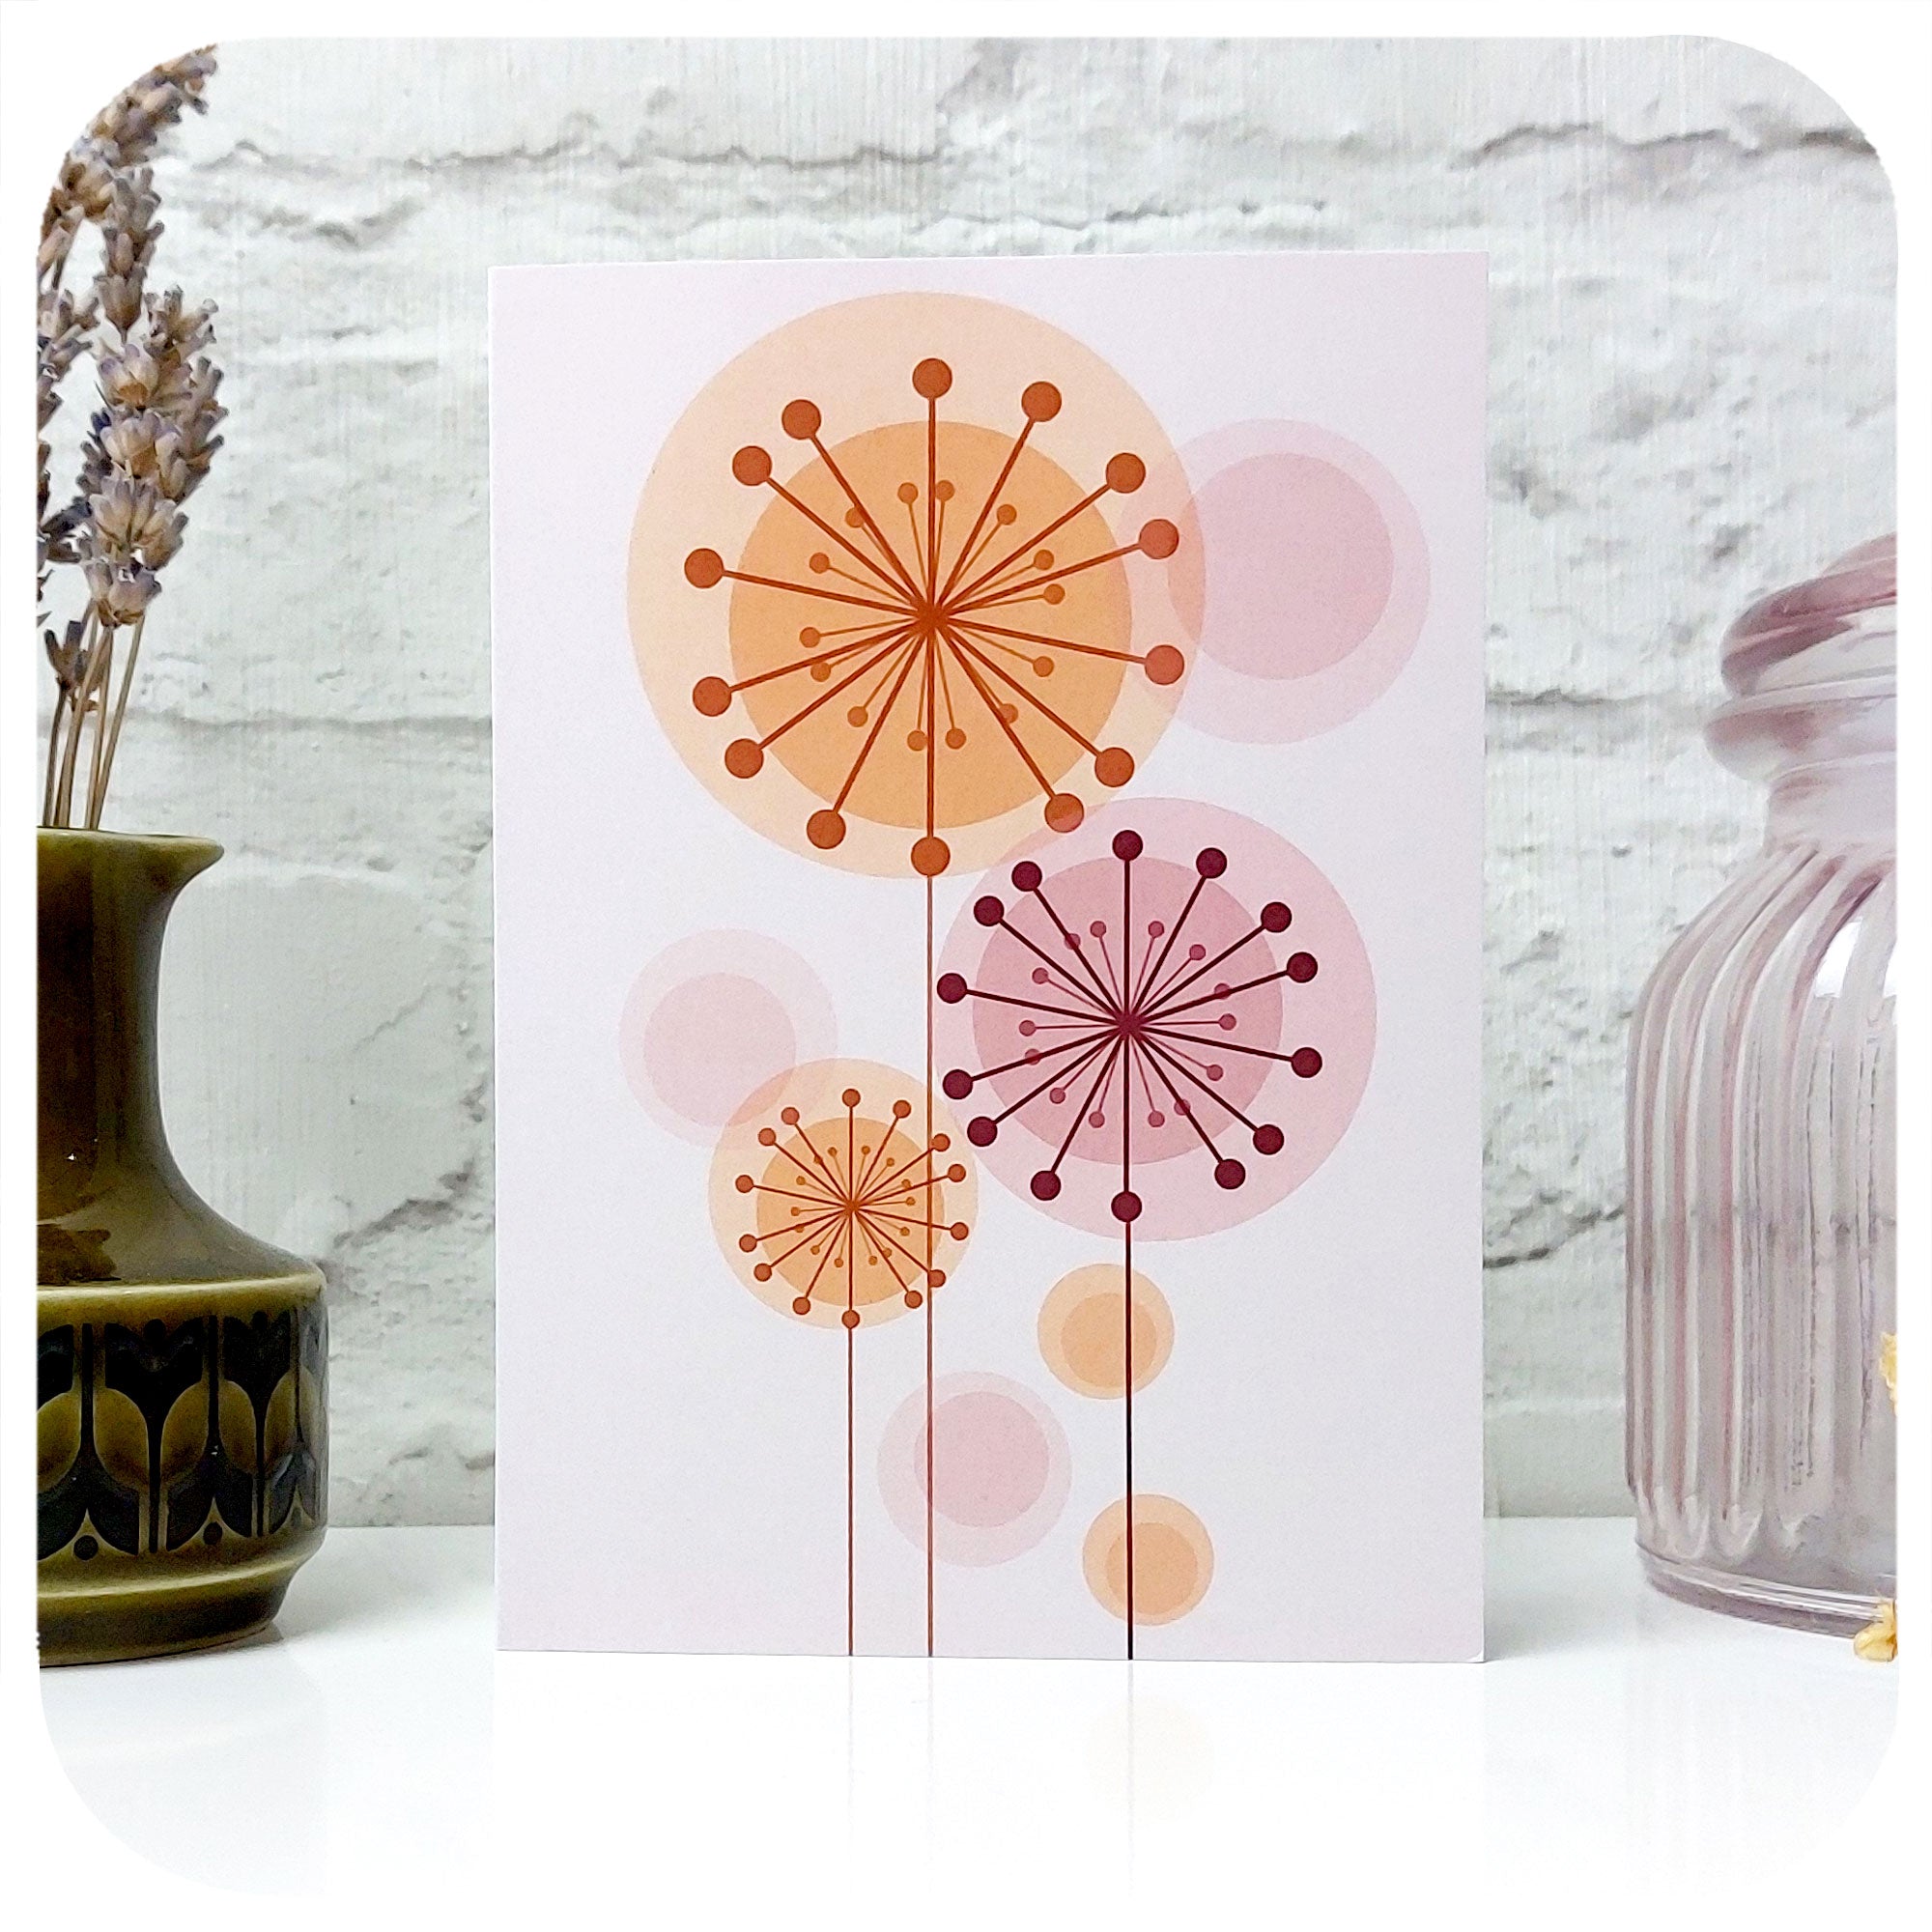 Retro Alliums Blank Greetings Card standing with vintage jug and jar | The Inkabilly Emporium